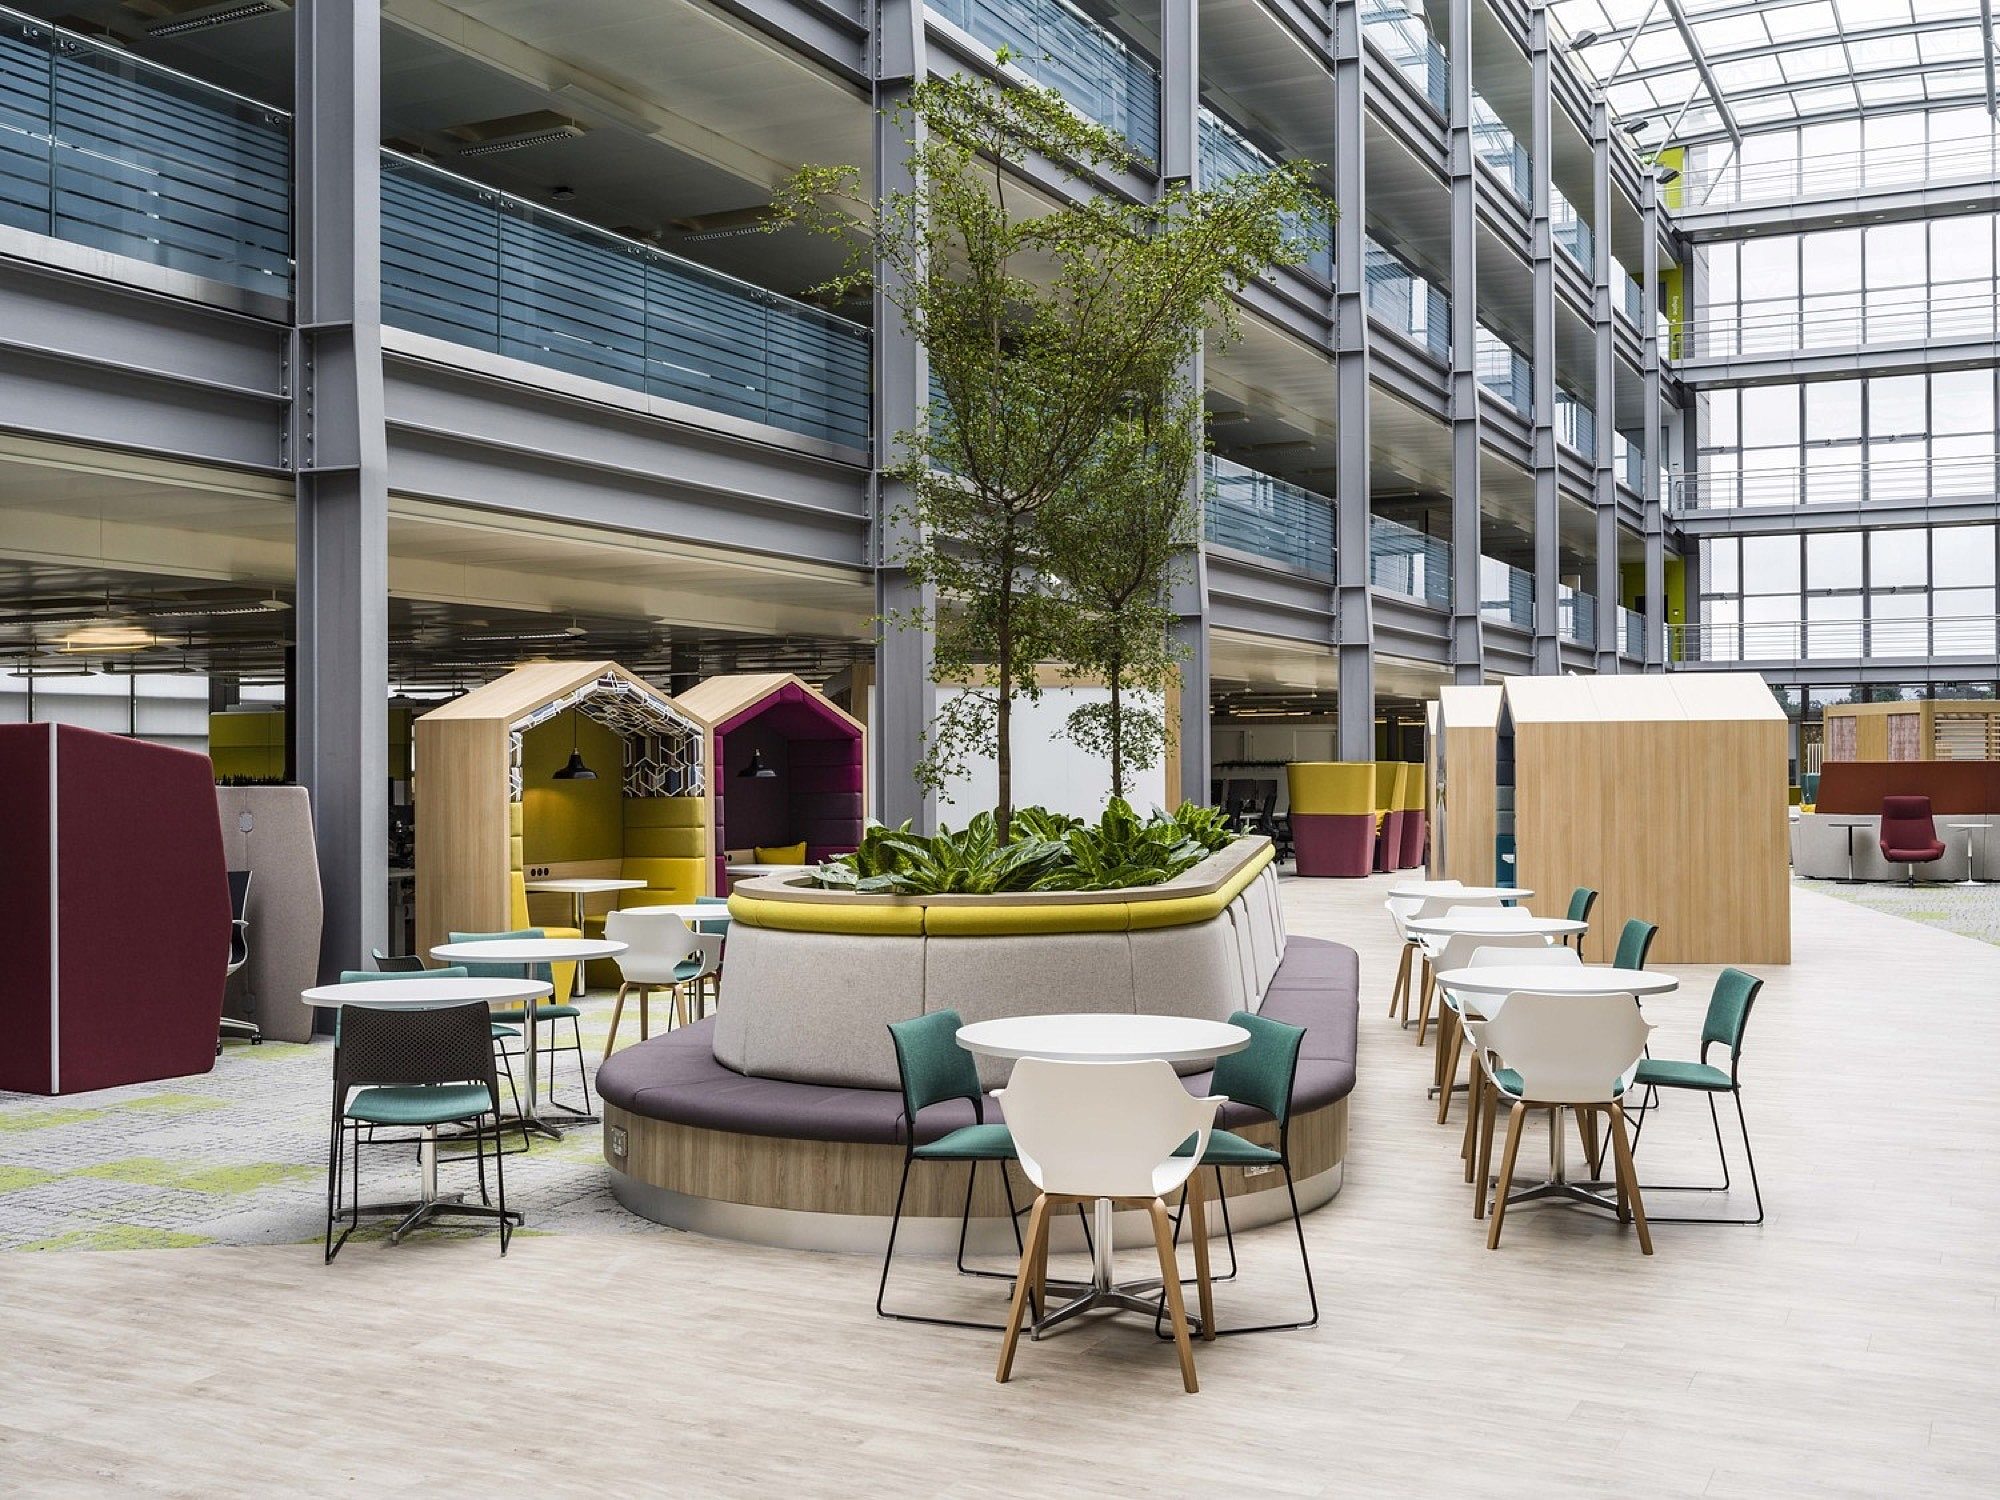 HMRC trees and office pods